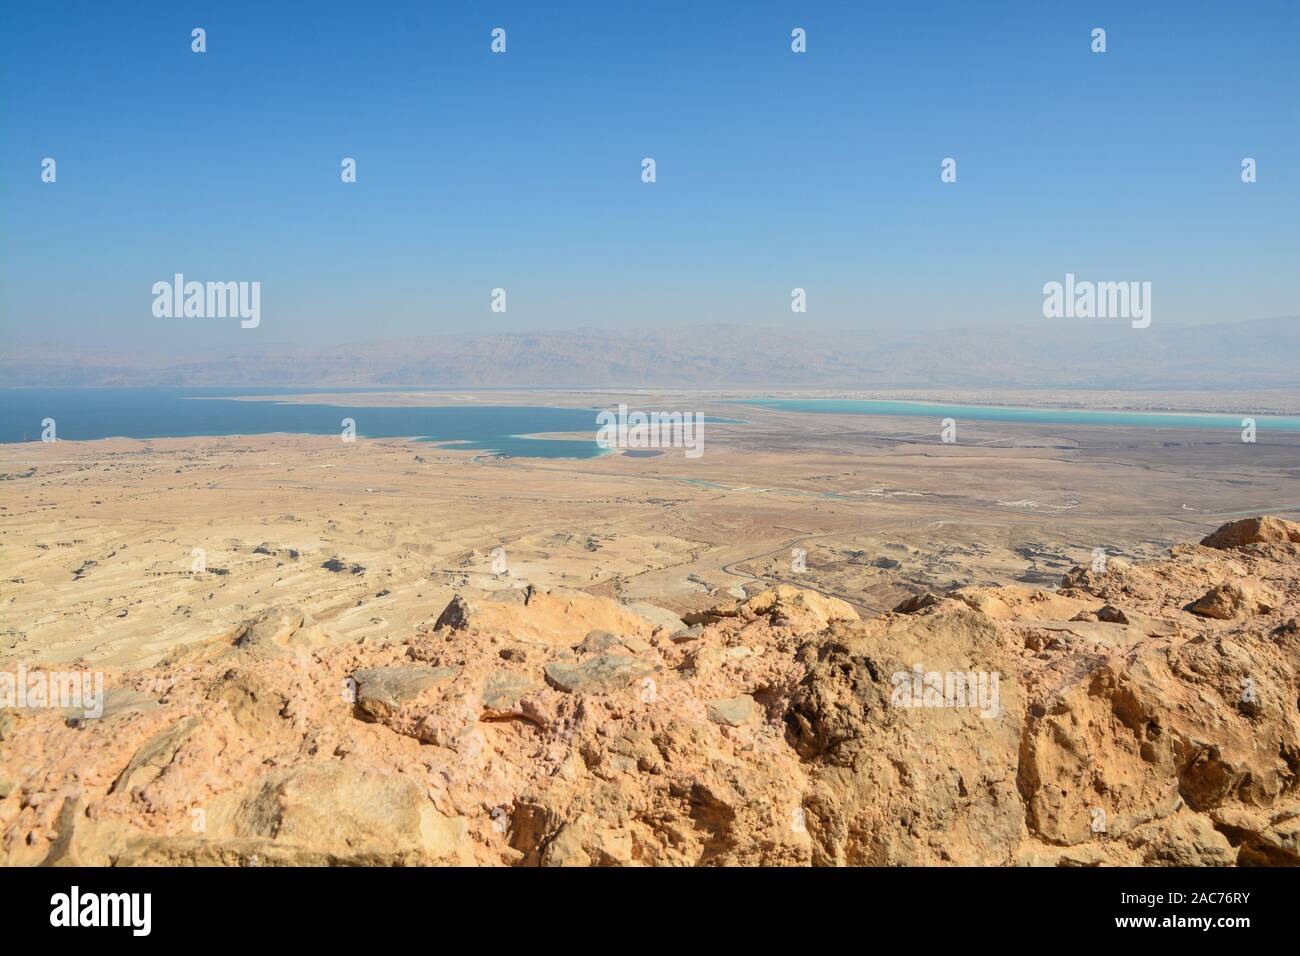 Israel. Judean Desert and the Dead Sea. Desert landscape at the end of autumn. Stock Photo